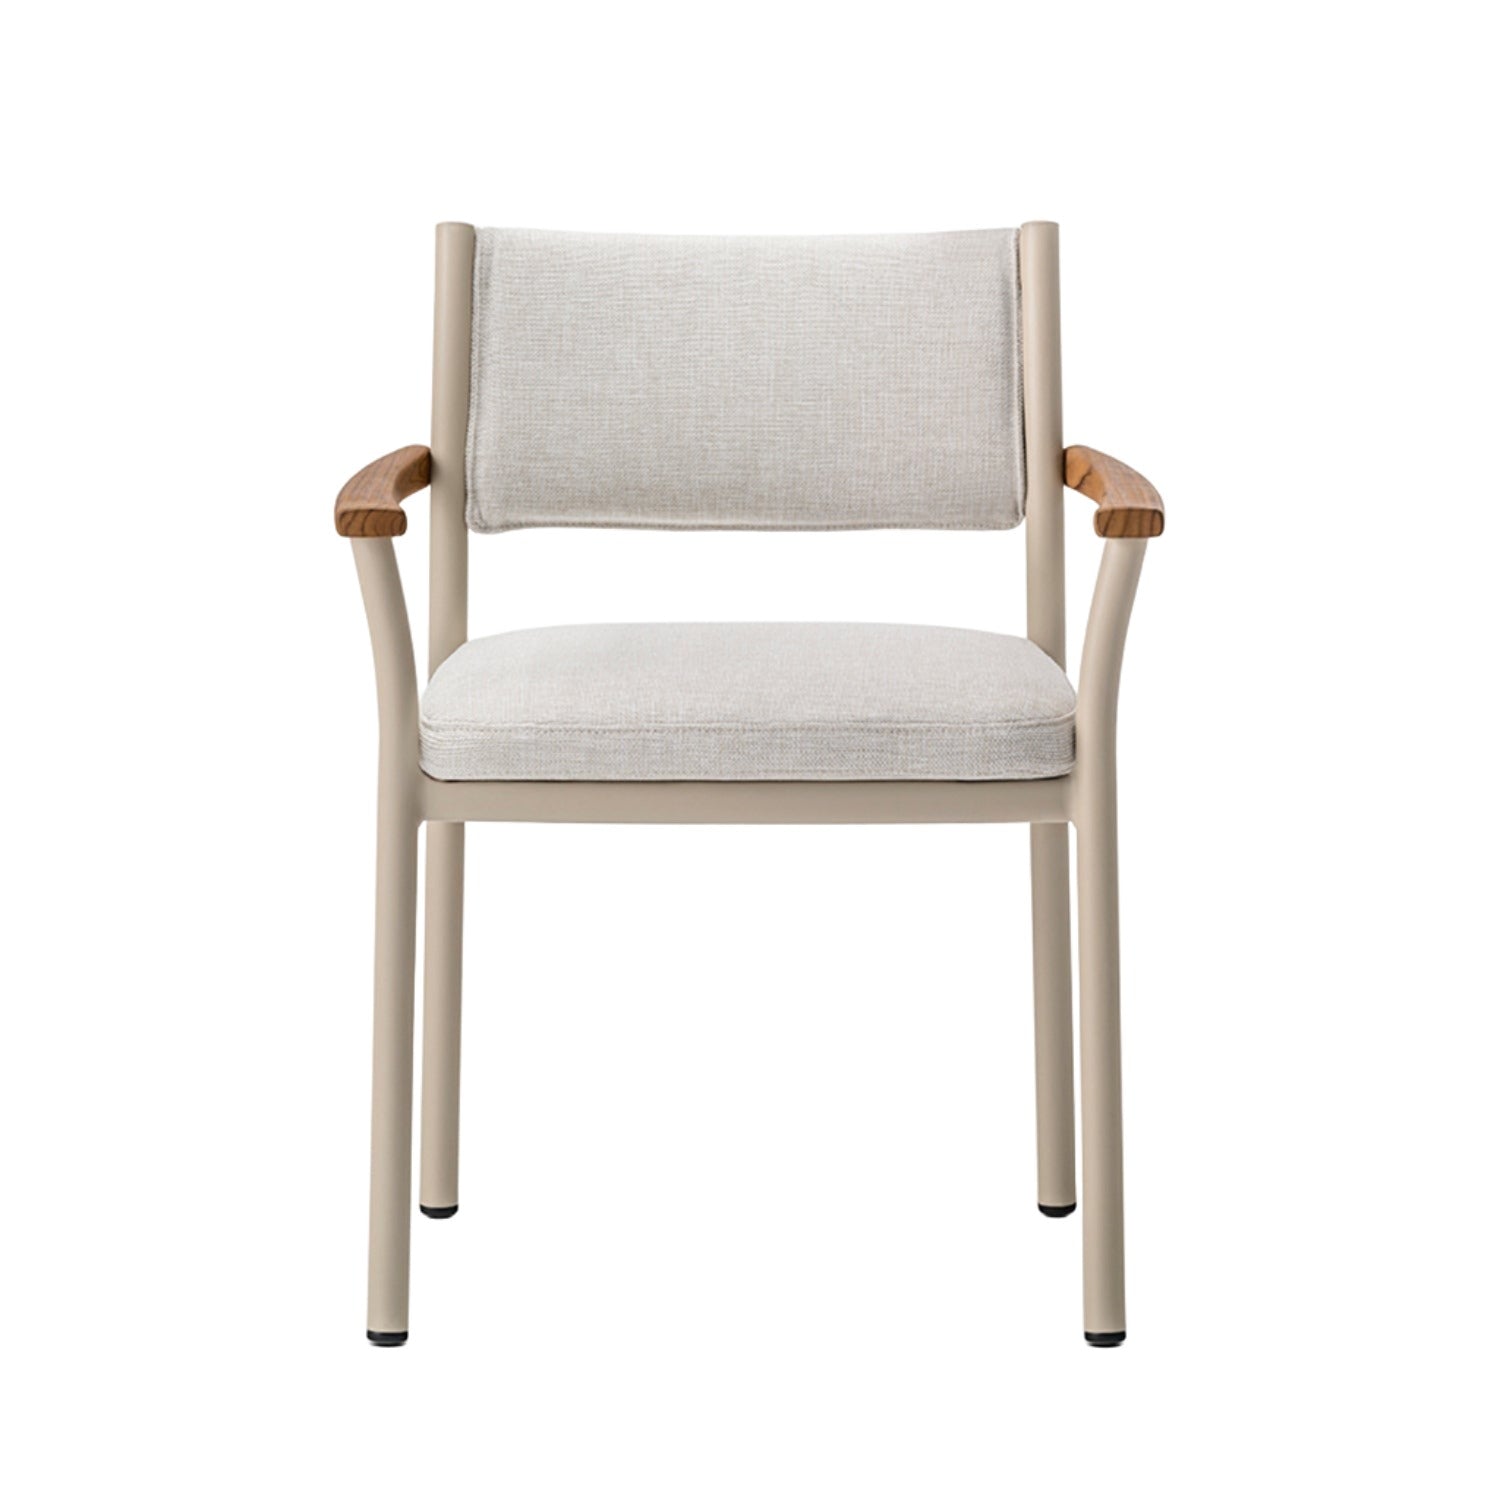 Pedrali 3694+3694.5 outdoor dining chair in beige frame and grey upholstery